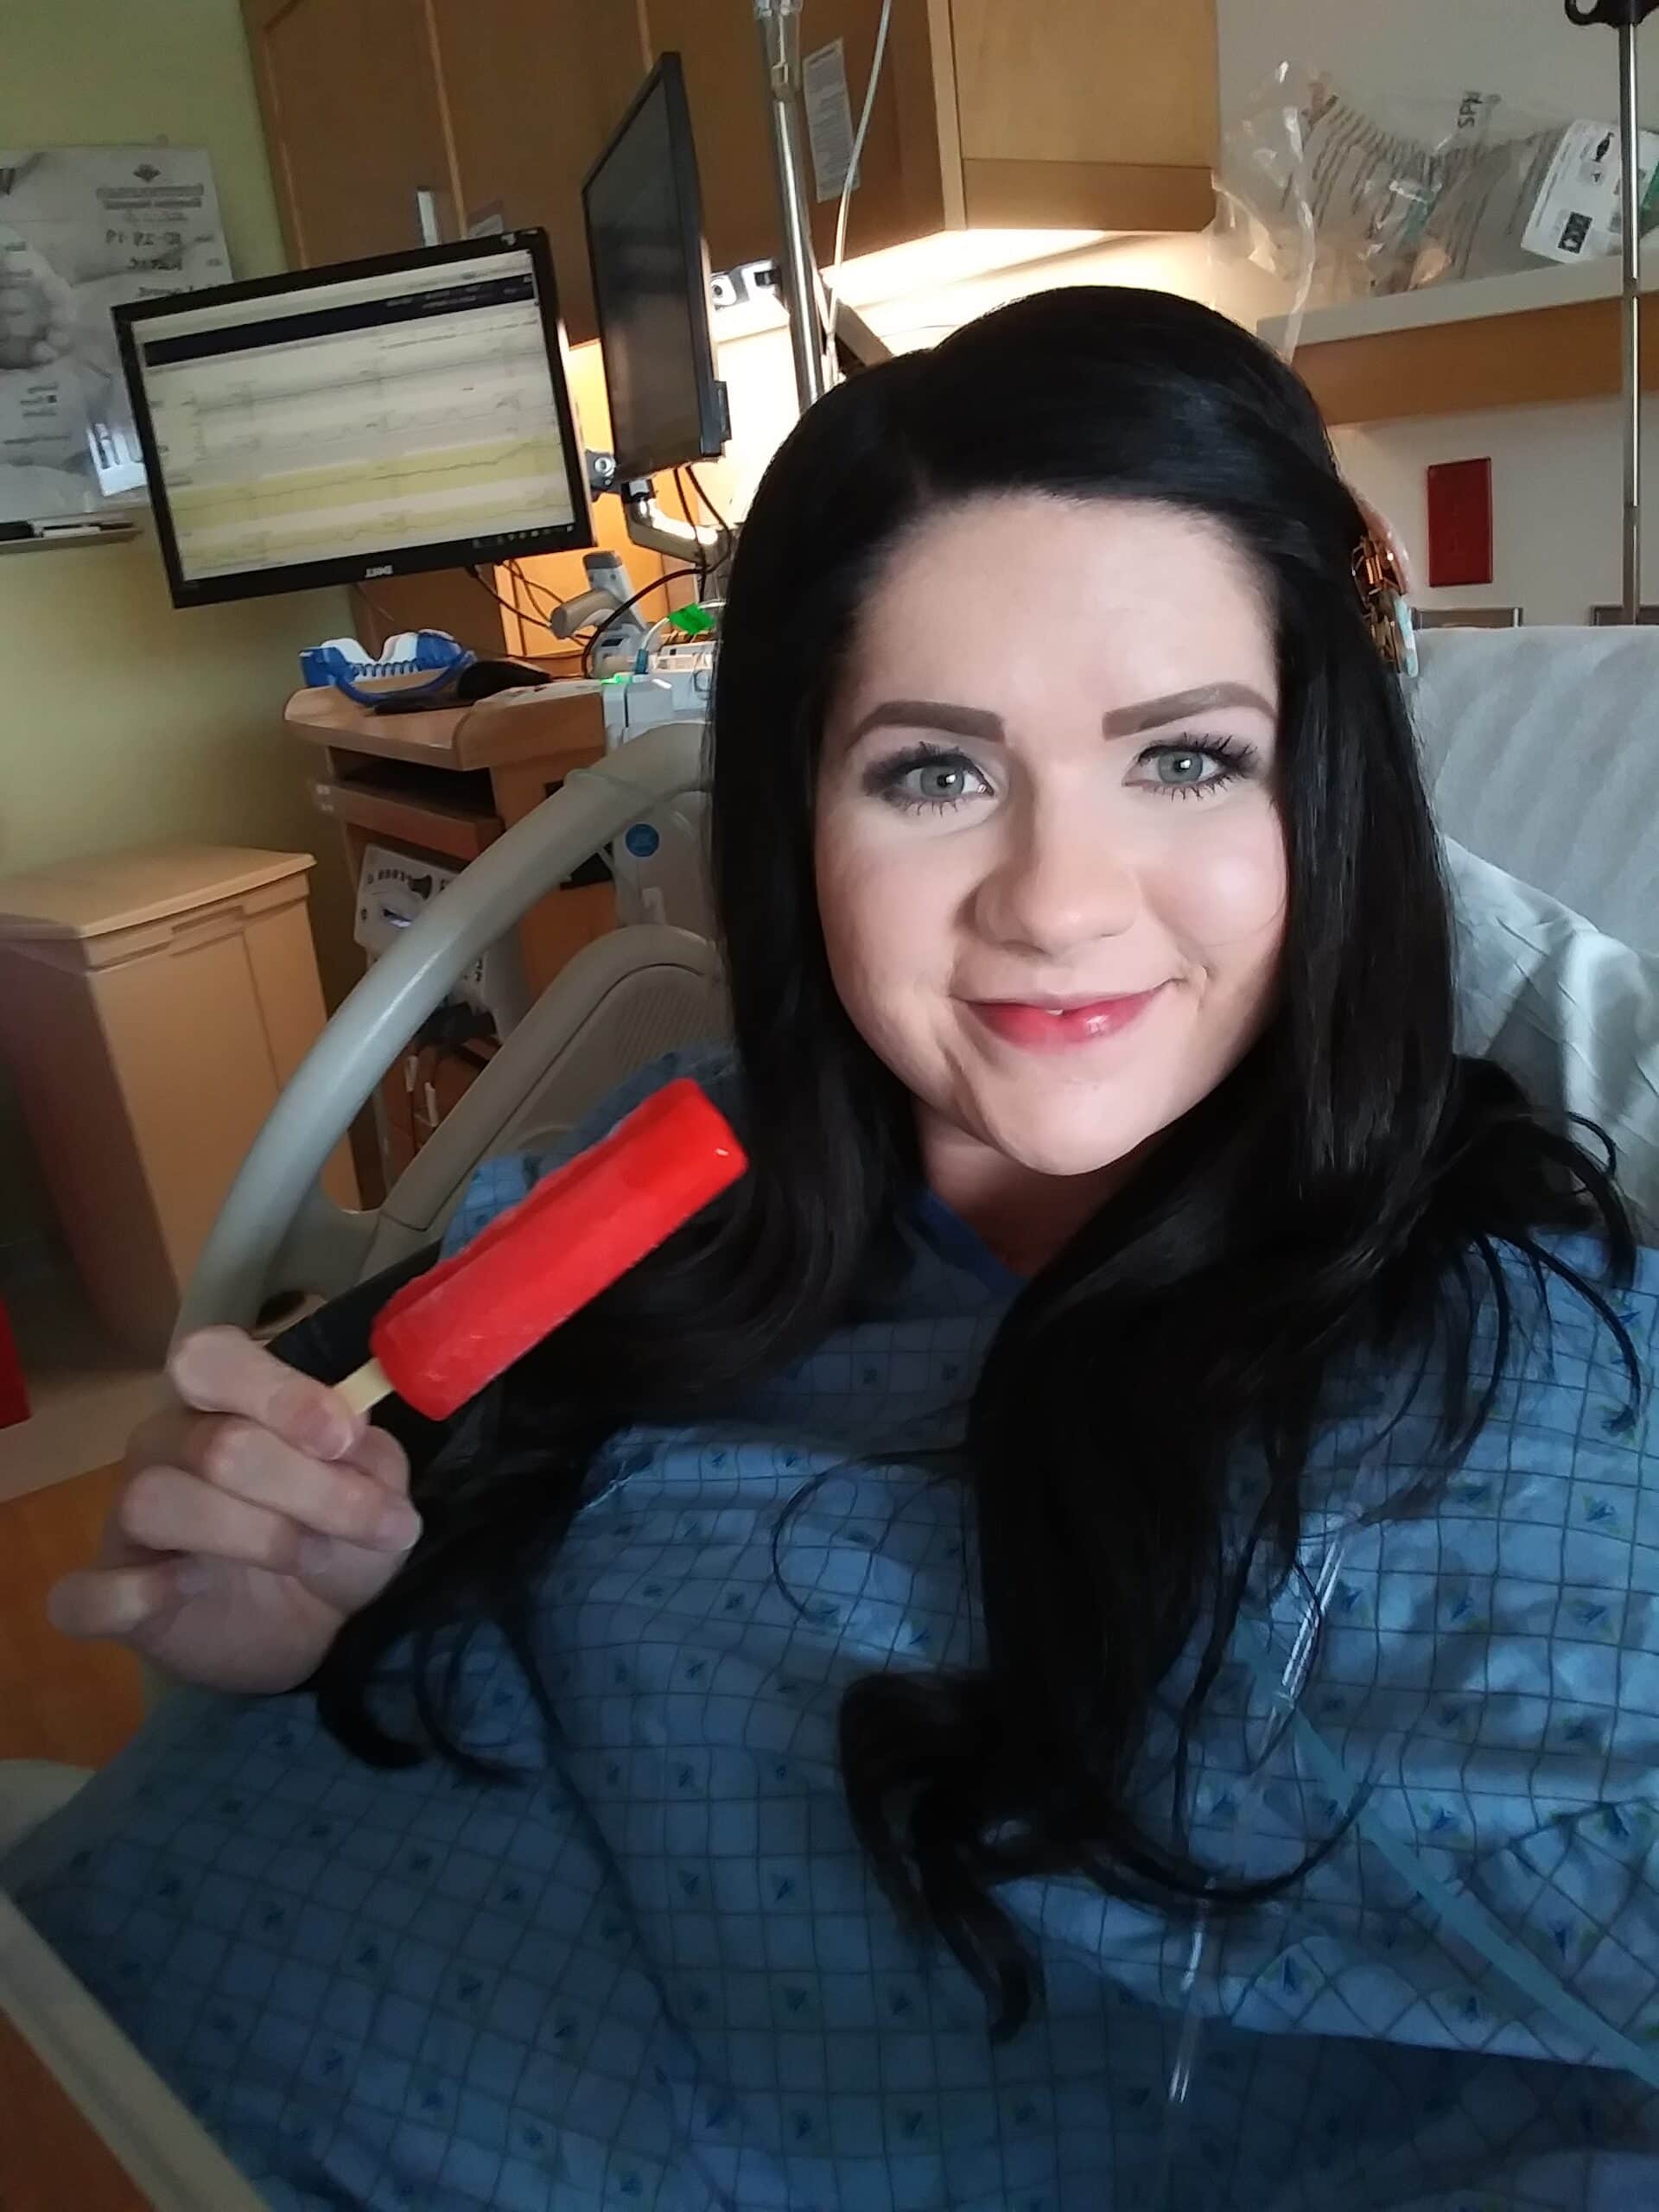 Pregnant brunette woman holds up a popsicle during and takes a selfie in hospital bed.